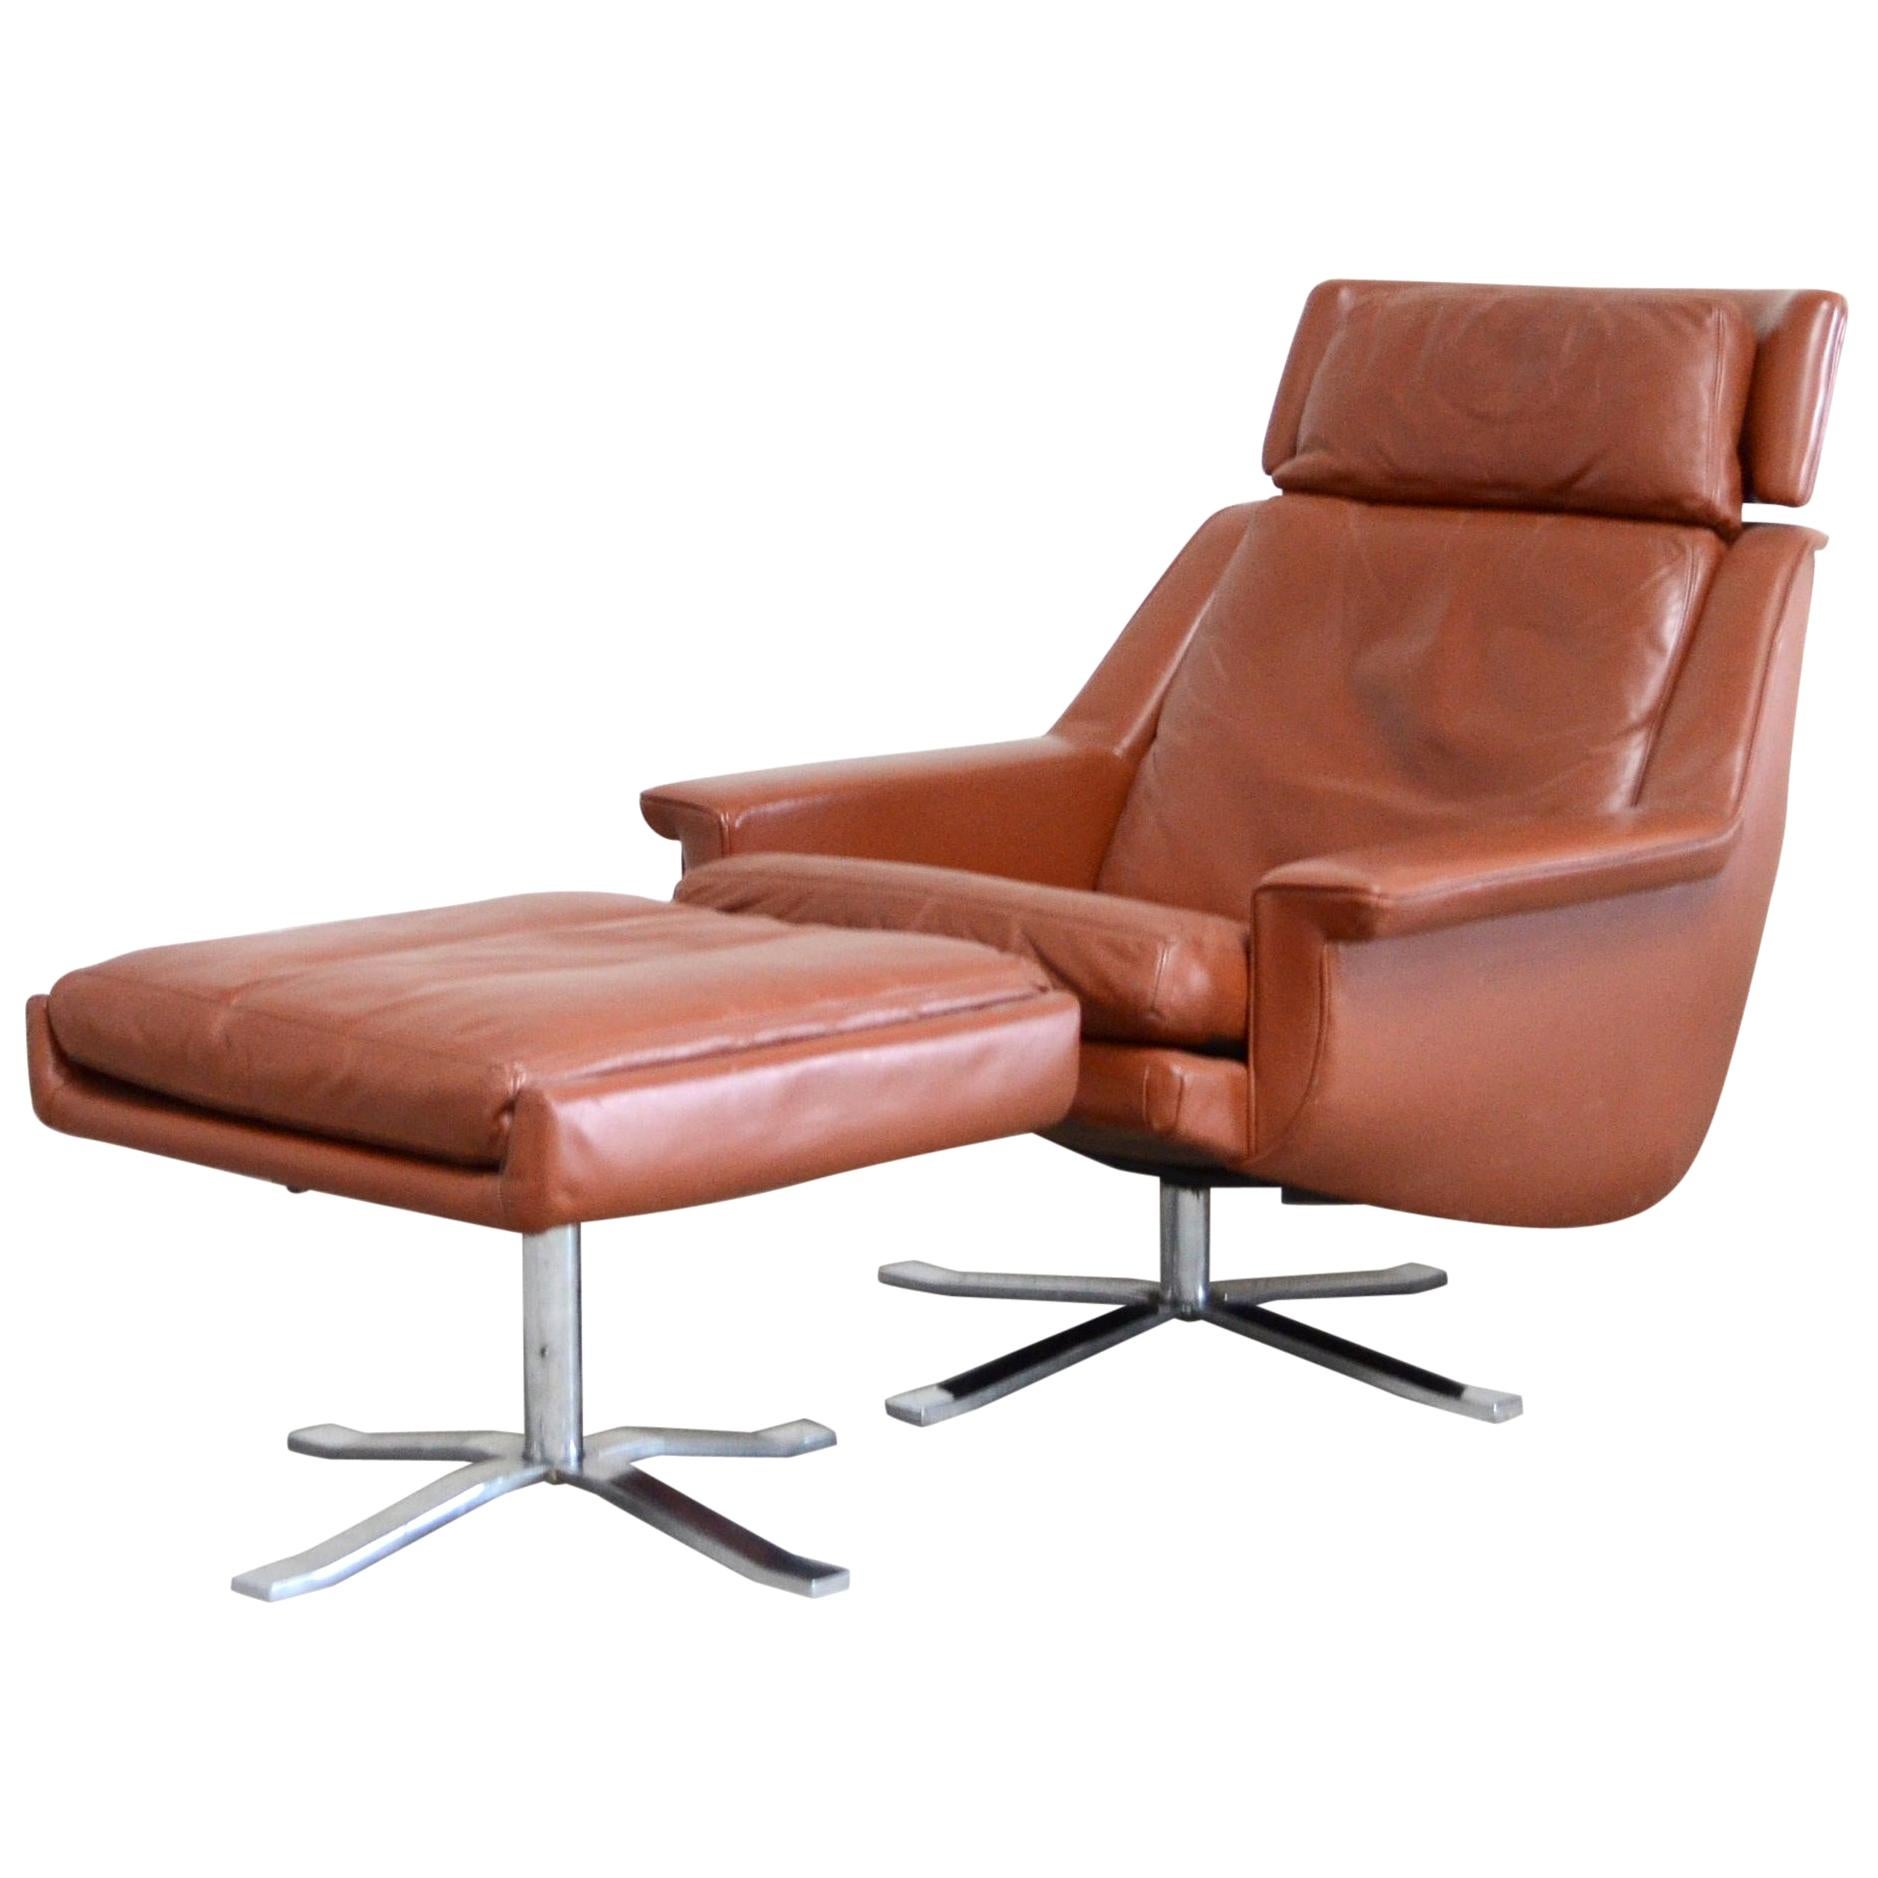 Esa Model 802 Leather Danish Lounge Chair and Ottoman by Werner Langenfeld, 1960